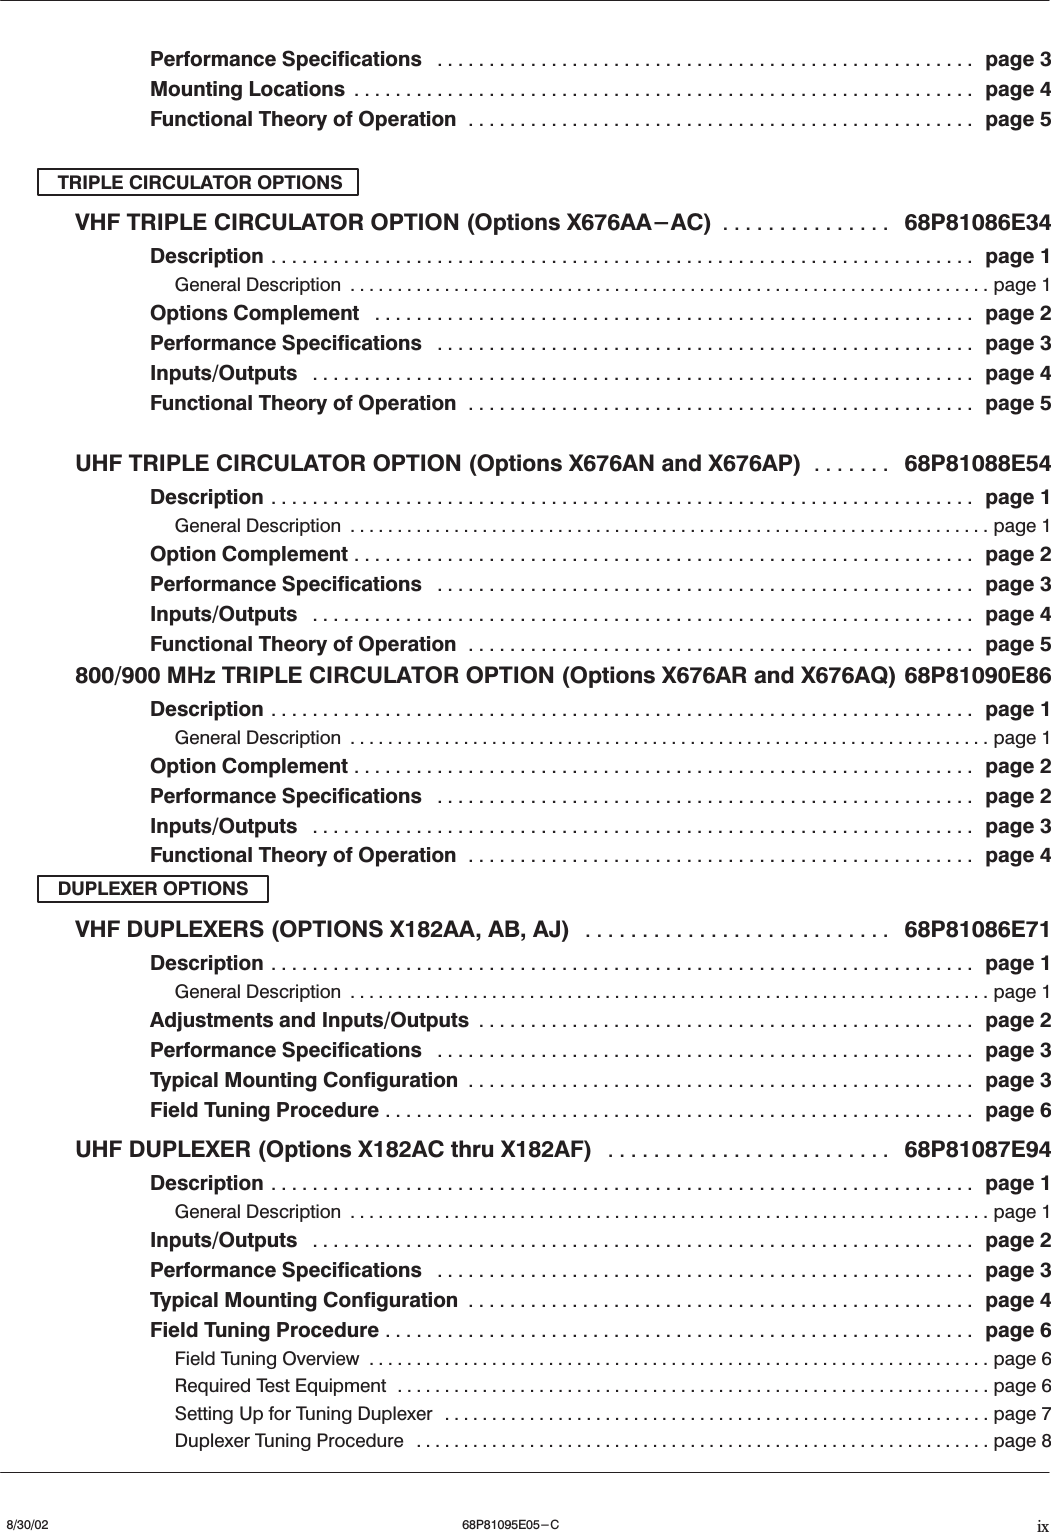 ix8/30/02 68P81095E05-CPerformance Specifications page 3....................................................Mounting Locations page 4............................................................Functional Theory of Operation page 5.................................................TRIPLE CIRCULATOR OPTIONSVHF TRIPLE CIRCULATOR OPTION (Options X676AA-AC) 68P81086E34...............Description page 1....................................................................General Description page 1....................................................................Options Complement page 2..........................................................Performance Specifications page 3....................................................Inputs/Outputs page 4................................................................Functional Theory of Operation page 5.................................................UHF TRIPLE CIRCULATOR OPTION (Options X676AN and X676AP) 68P81088E54.......Description page 1....................................................................General Description page 1....................................................................Option Complement page 2............................................................Performance Specifications page 3....................................................Inputs/Outputs page 4................................................................Functional Theory of Operation page 5.................................................800/900 MHz TRIPLE CIRCULATOR OPTION (Options X676AR and X676AQ) 68P81090E86Description page 1....................................................................General Description page 1....................................................................Option Complement page 2............................................................Performance Specifications page 2....................................................Inputs/Outputs page 3................................................................Functional Theory of Operation page 4.................................................DUPLEXER OPTIONSVHF DUPLEXERS (OPTIONS X182AA, AB, AJ) 68P81086E71...........................Description page 1....................................................................General Description page 1....................................................................Adjustments and Inputs/Outputs page 2................................................Performance Specifications page 3....................................................Typical Mounting Configuration page 3.................................................Field Tuning Procedure page 6.........................................................UHF DUPLEXER (Options X182AC thru X182AF) 68P81087E94.........................Description page 1....................................................................General Description page 1....................................................................Inputs/Outputs page 2................................................................Performance Specifications page 3....................................................Typical Mounting Configuration page 4.................................................Field Tuning Procedure page 6.........................................................Field Tuning Overview page 6..................................................................Required Test Equipment page 6...............................................................Setting Up for Tuning Duplexer page 7..........................................................Duplexer Tuning Procedure page 8.............................................................